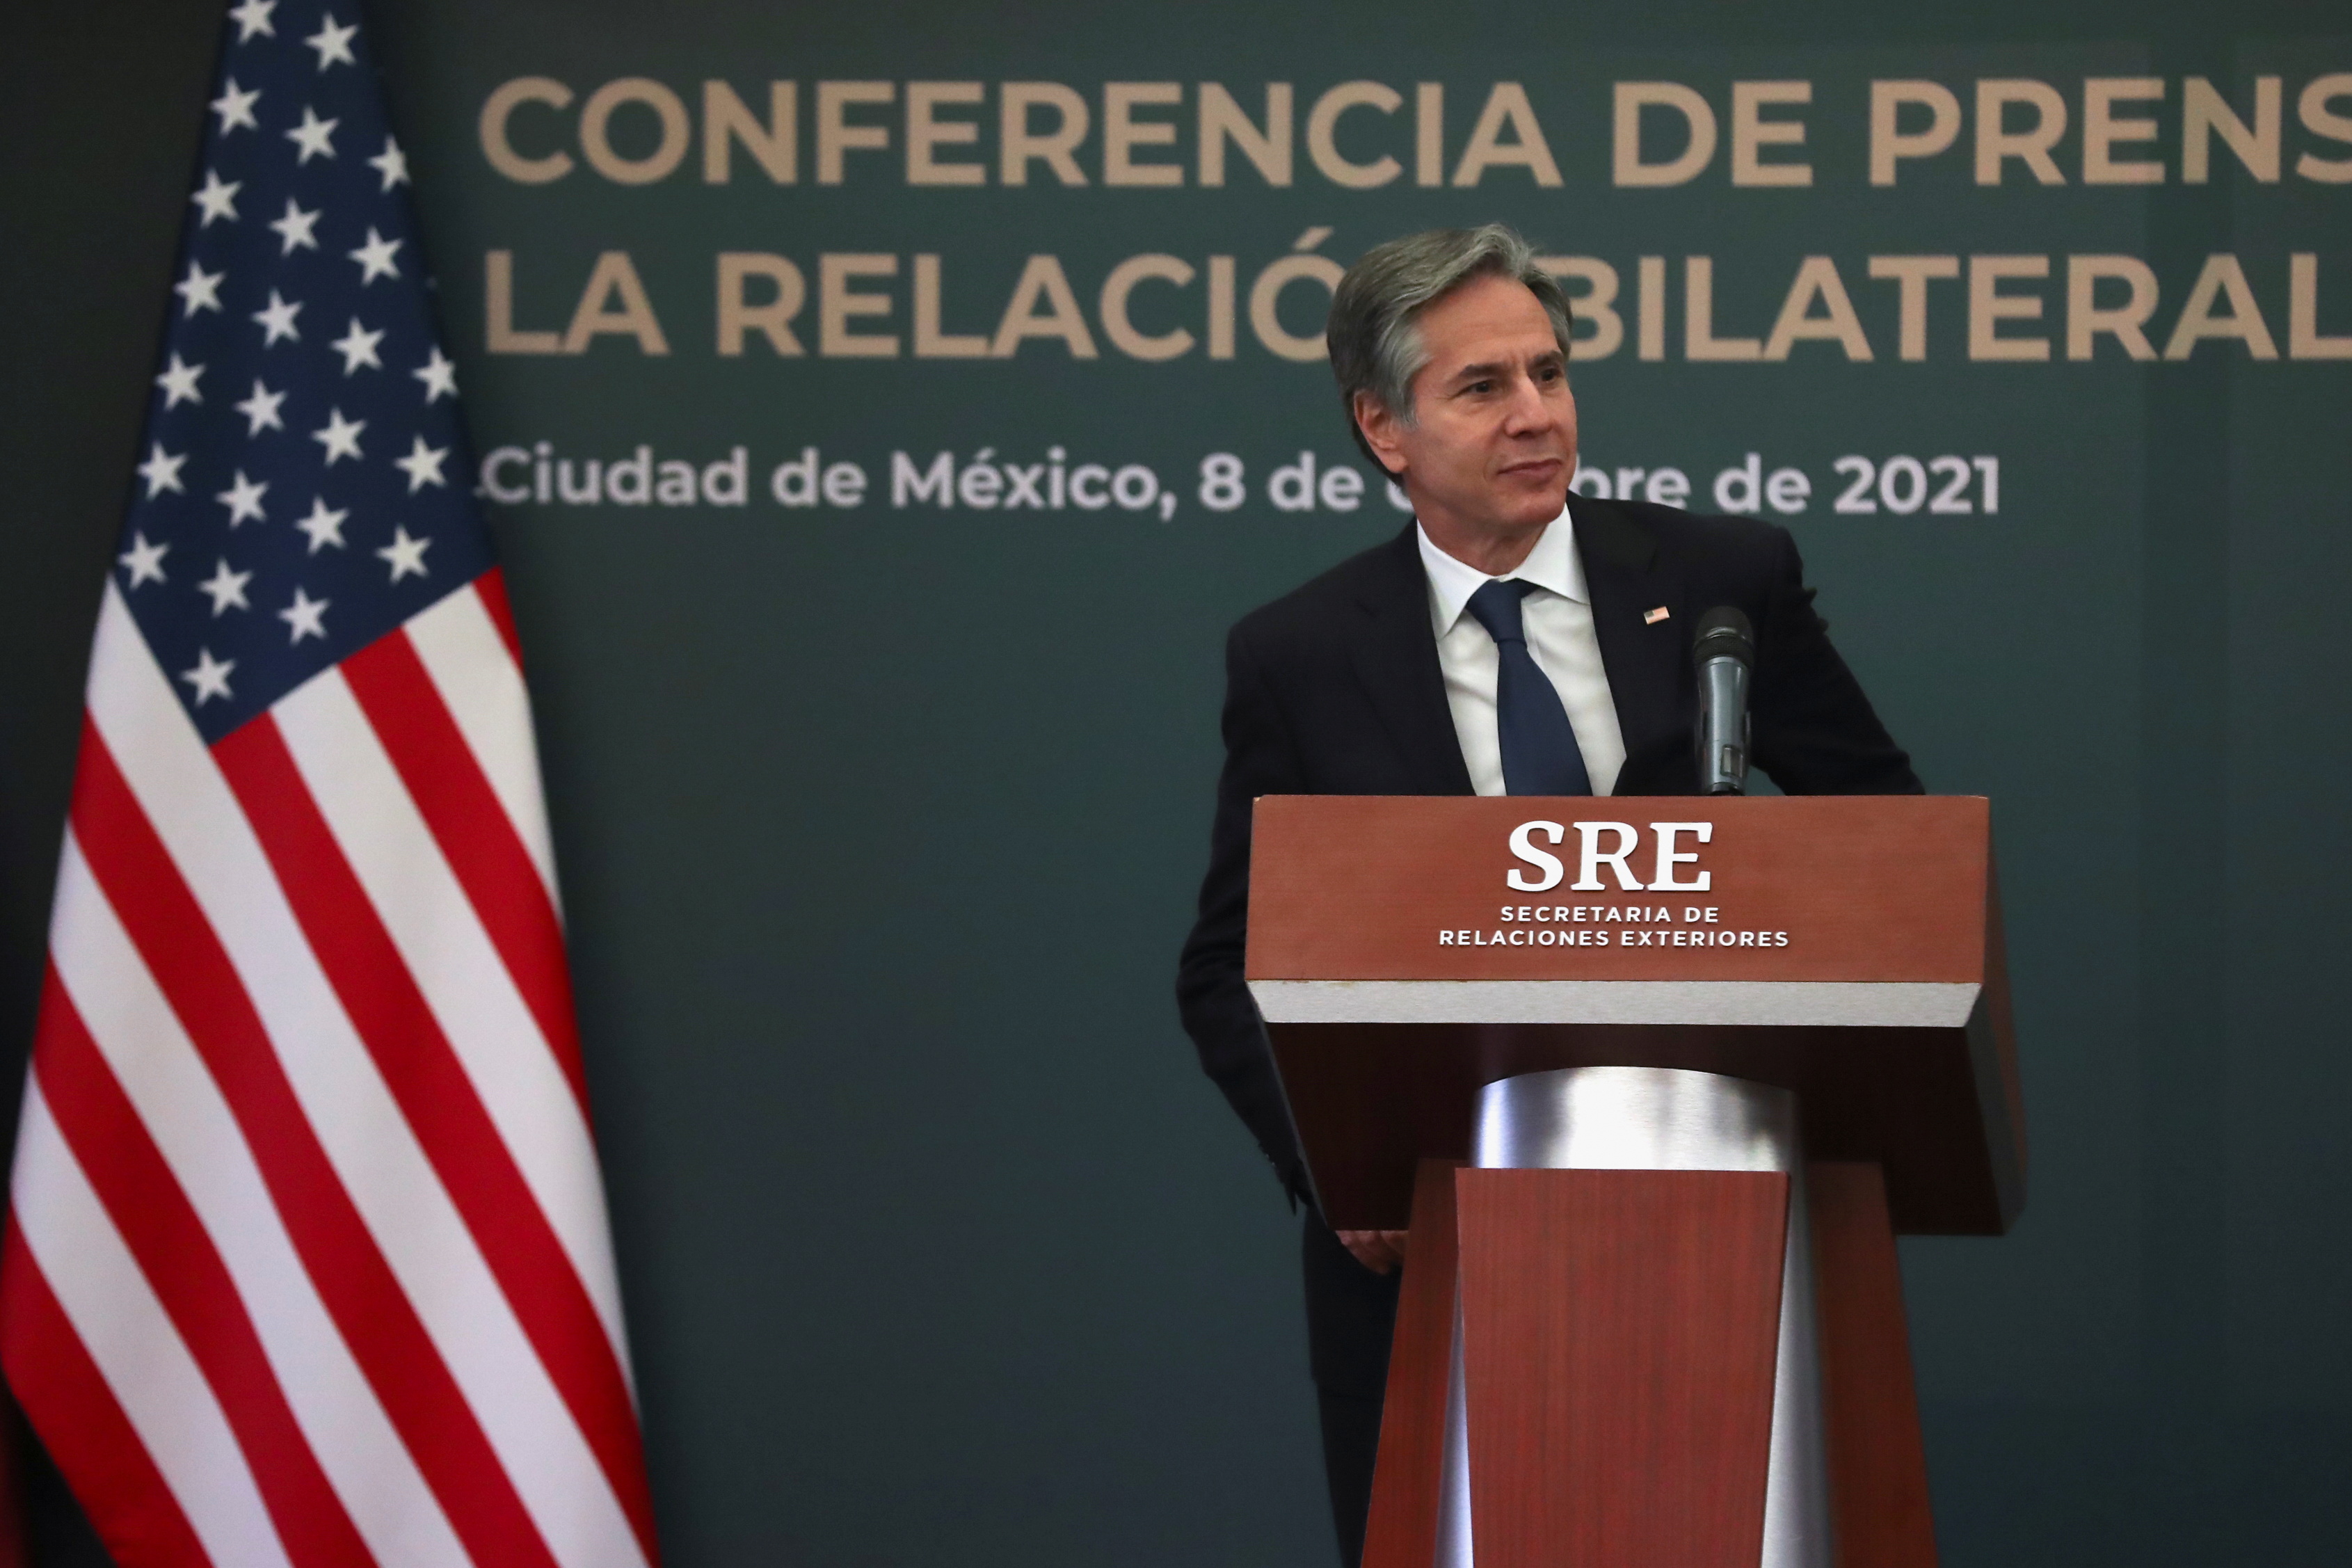 U.S. Secretary of State Antony Blinken addresses media following U.S.-Mexico High Level Security Dialogue in Mexico City, in Mexico October 8, 2021. REUTERS/Edgard Garrido